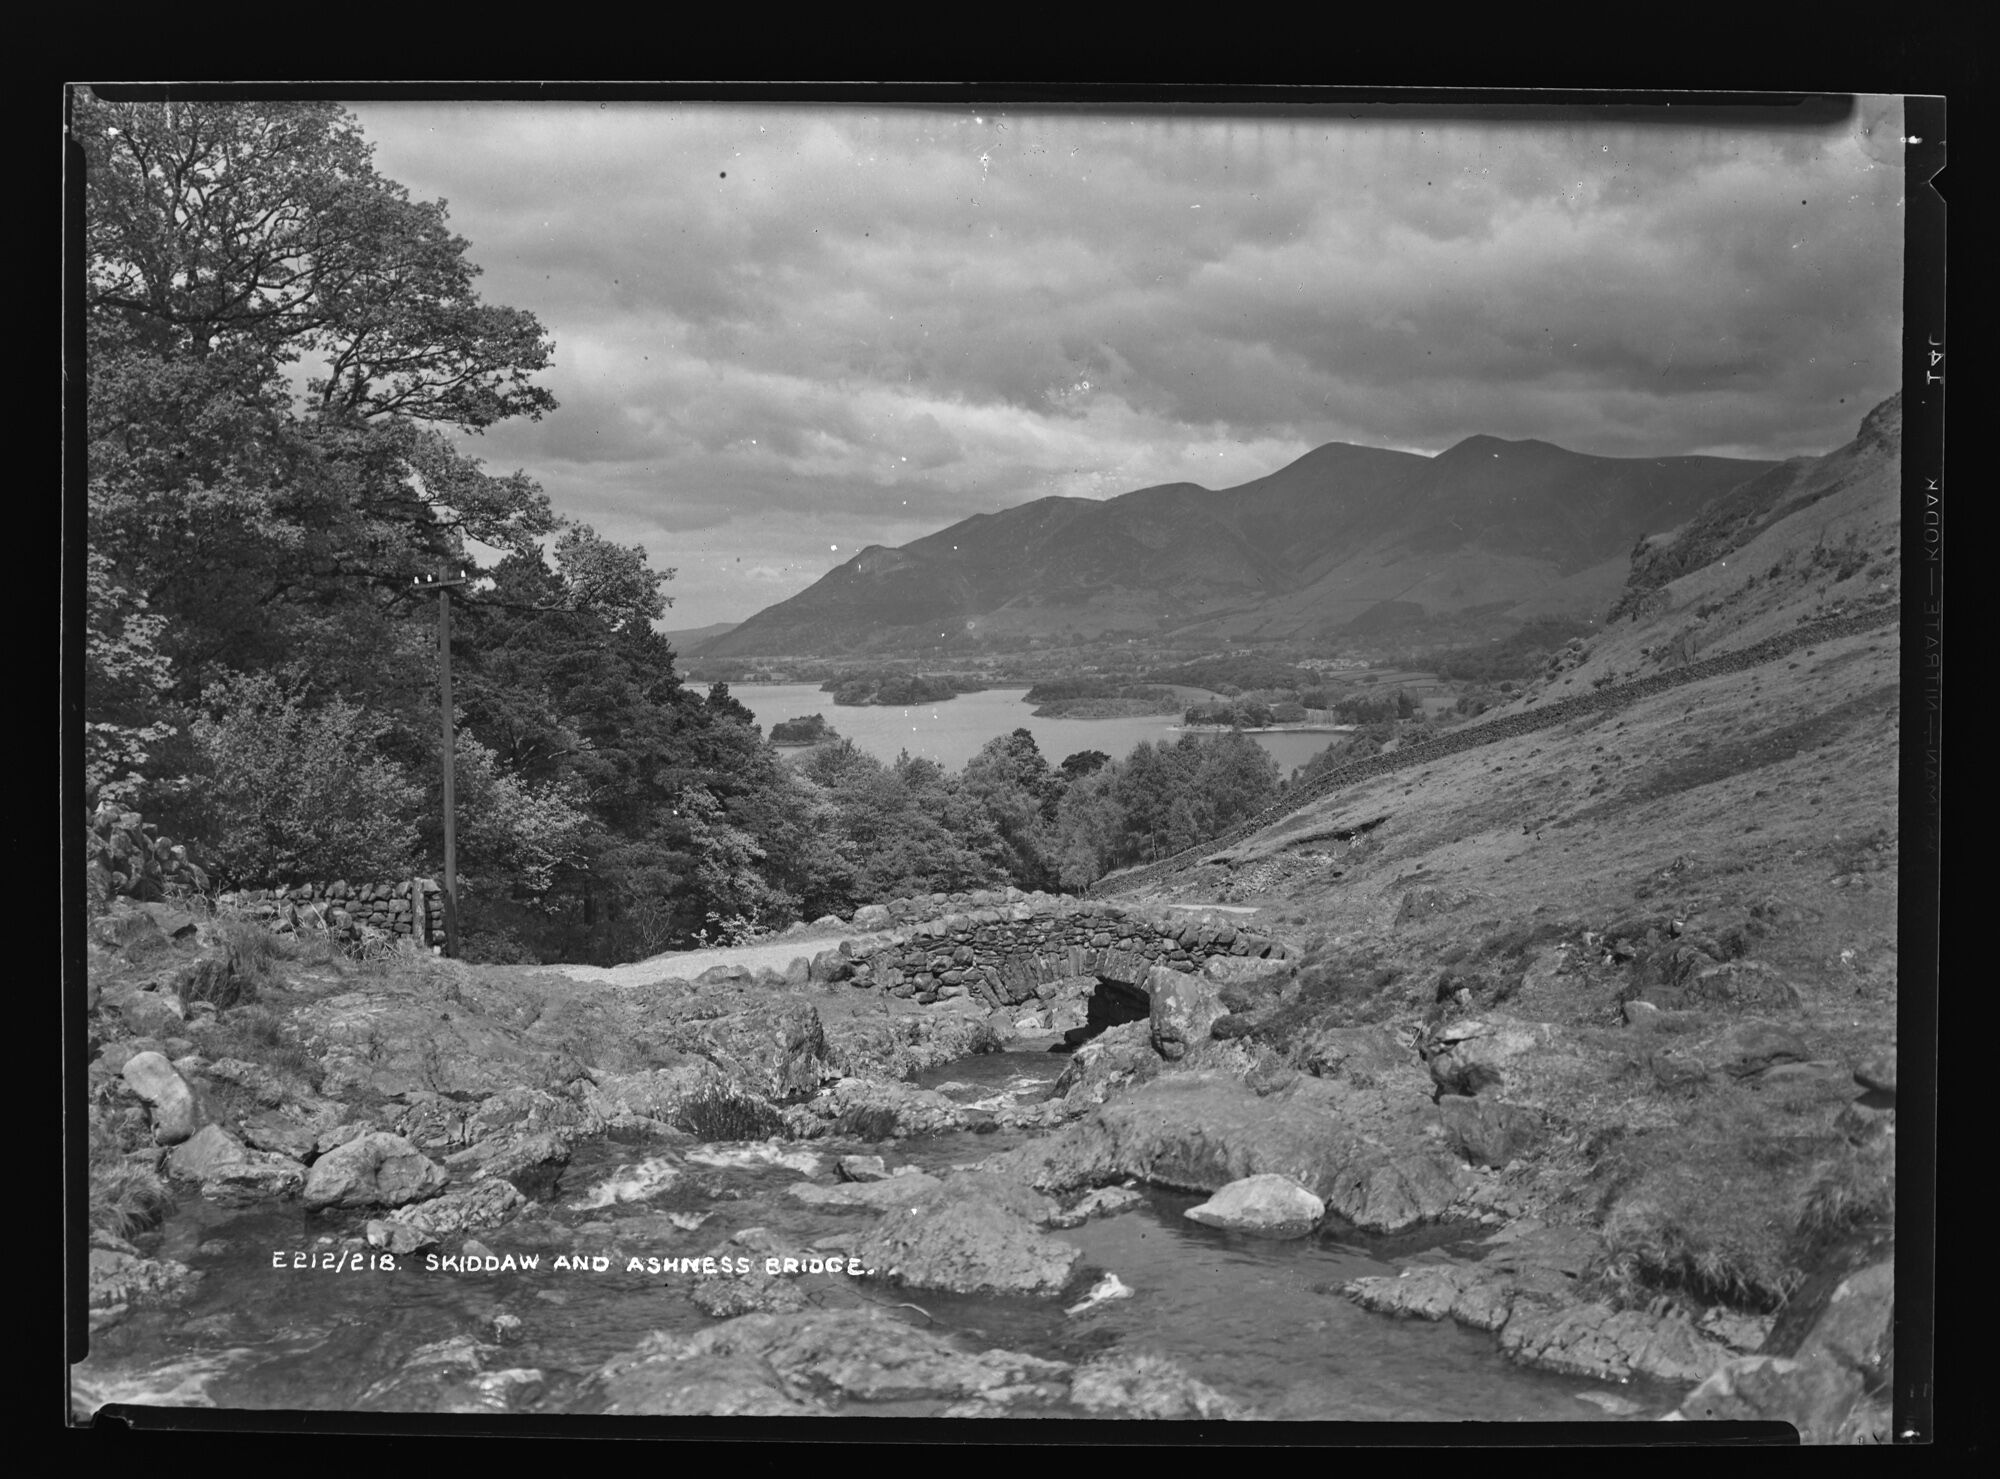 Skiddaw and Ashness Bridge, from above Borrowdale